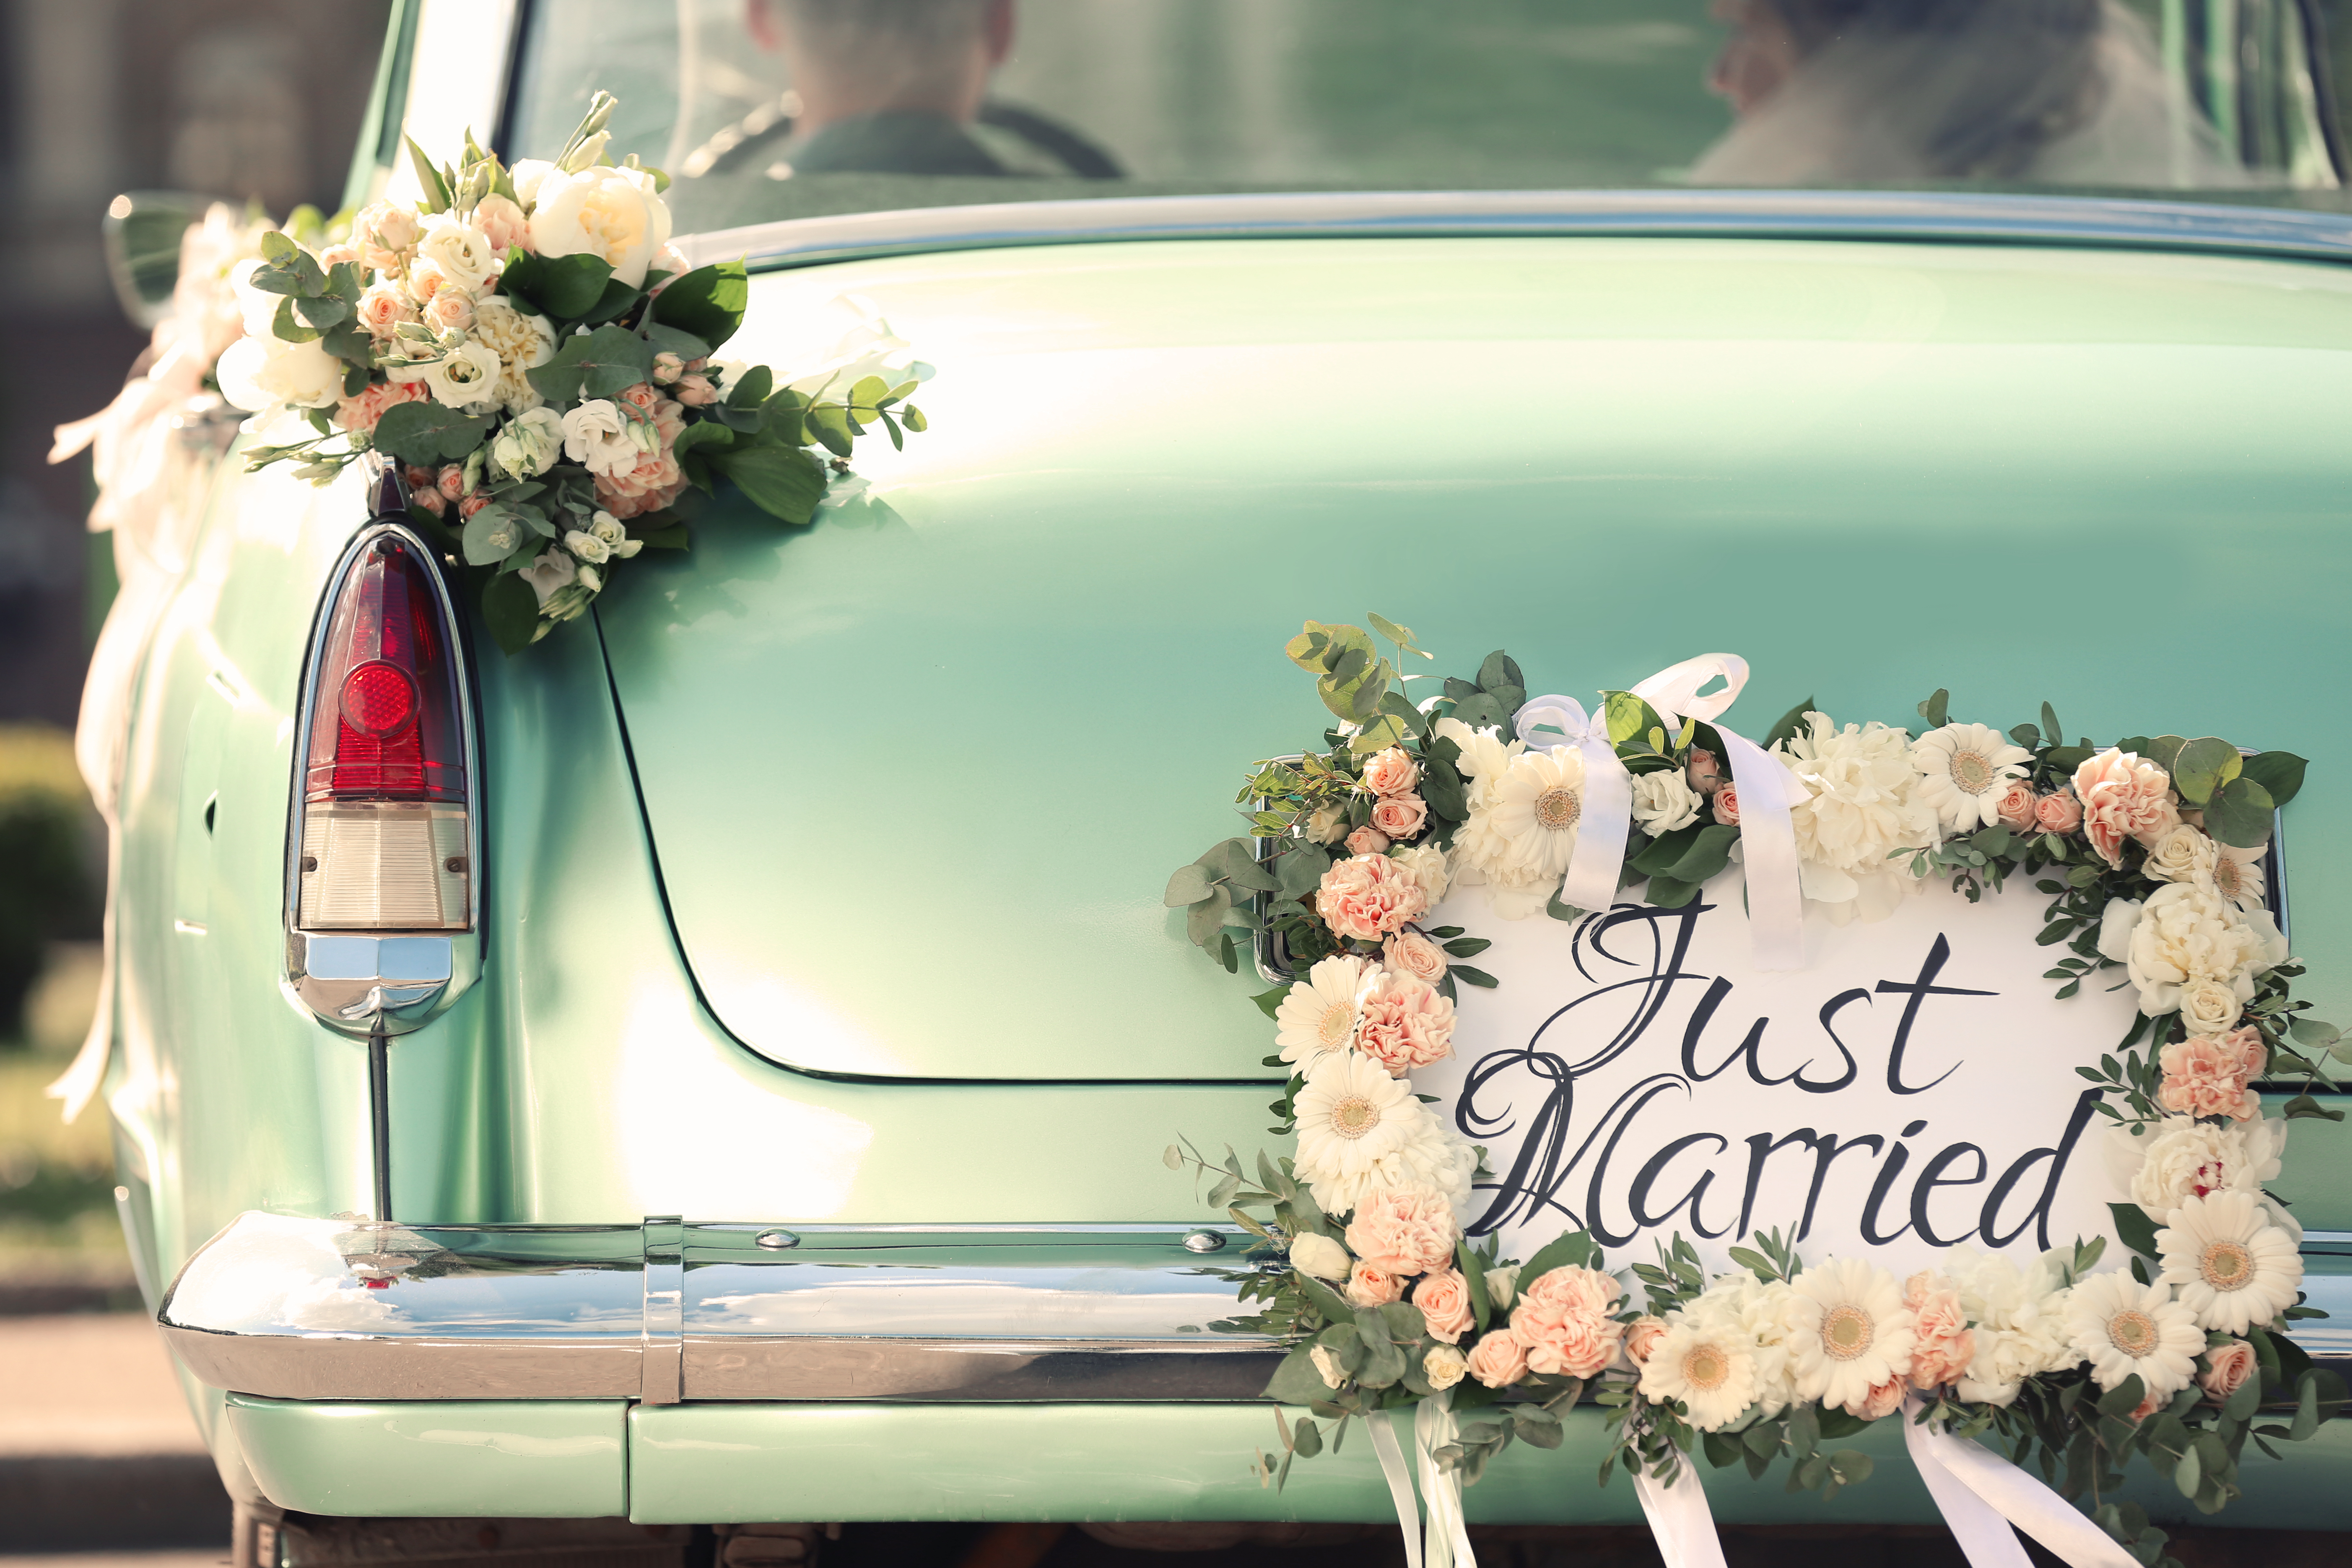 A car with a "Just Married" plate and flower decor | Source: Shutterstock